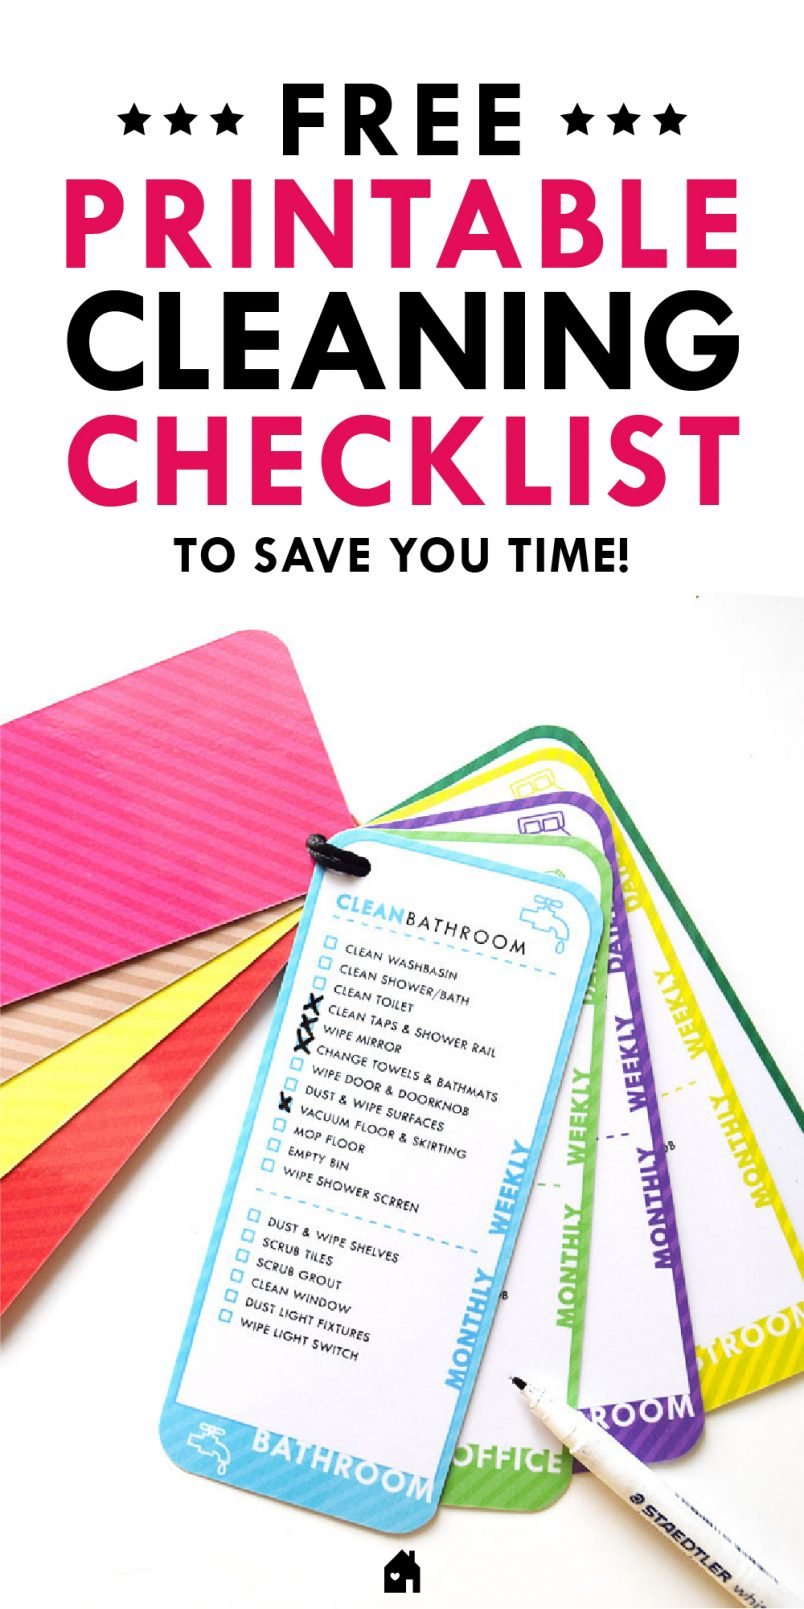 Cleaning Checklist - Free Printable!